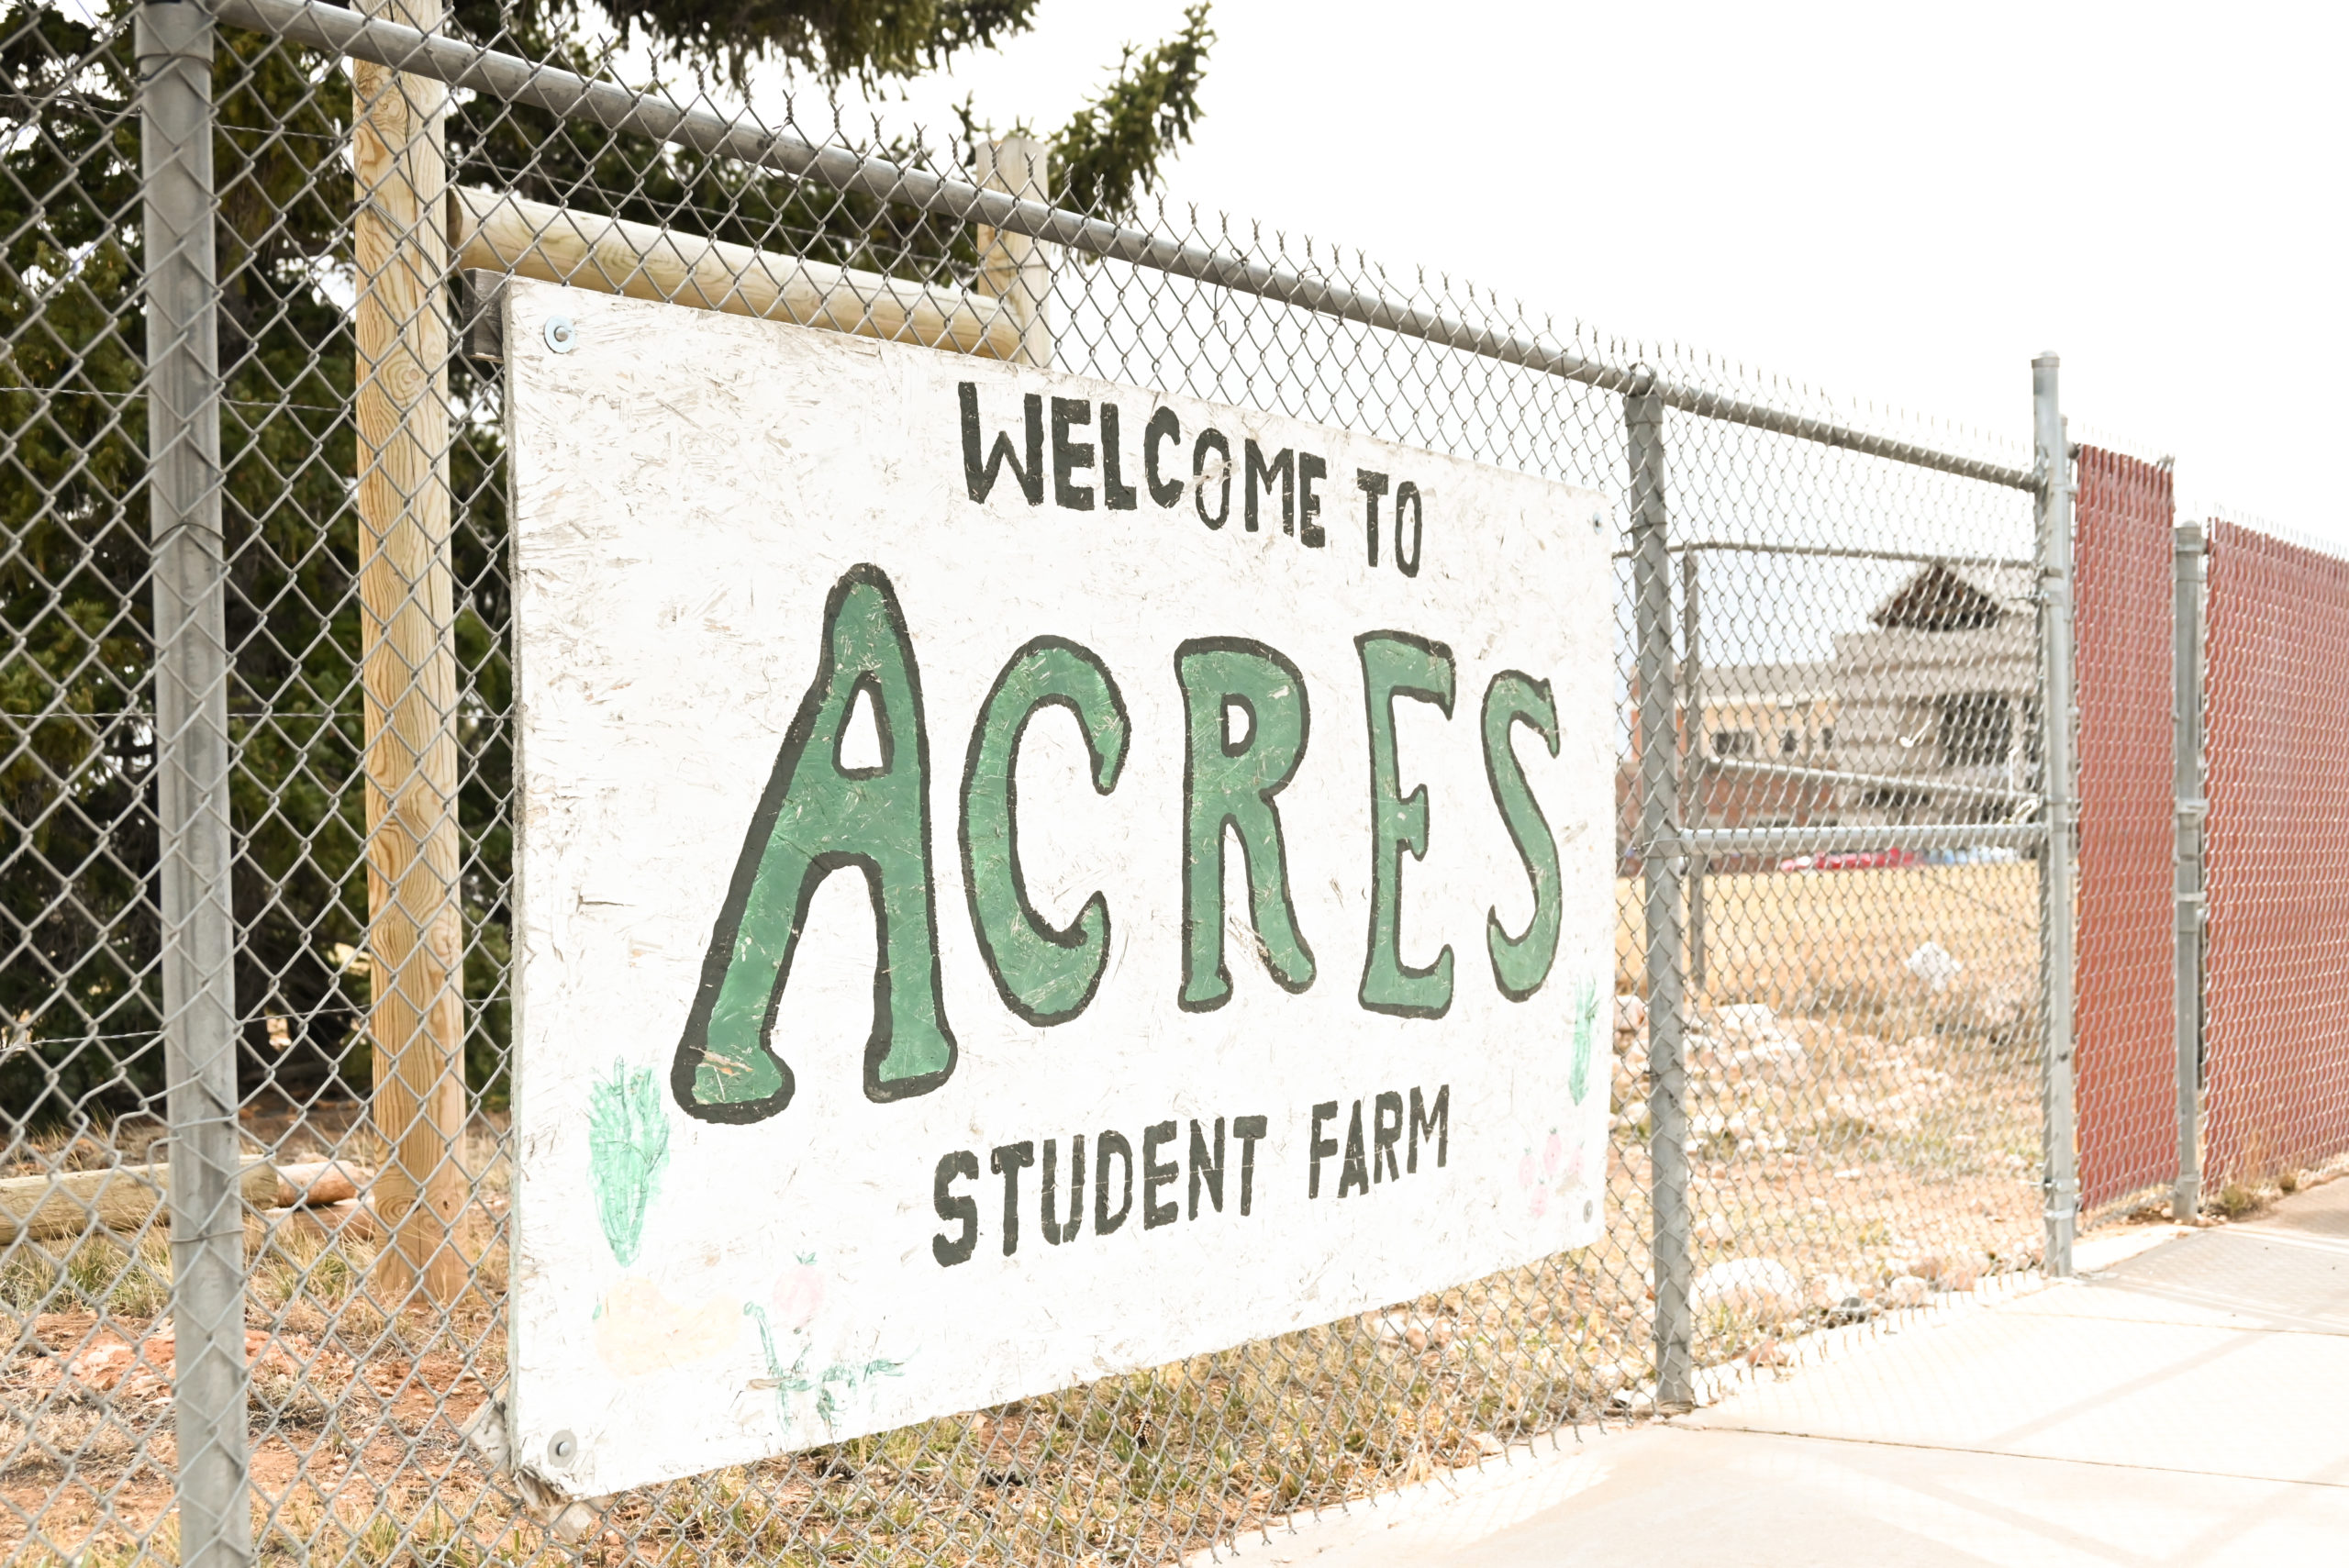 ACRES student farm, located near the corner of Harney Street and 30th Street.